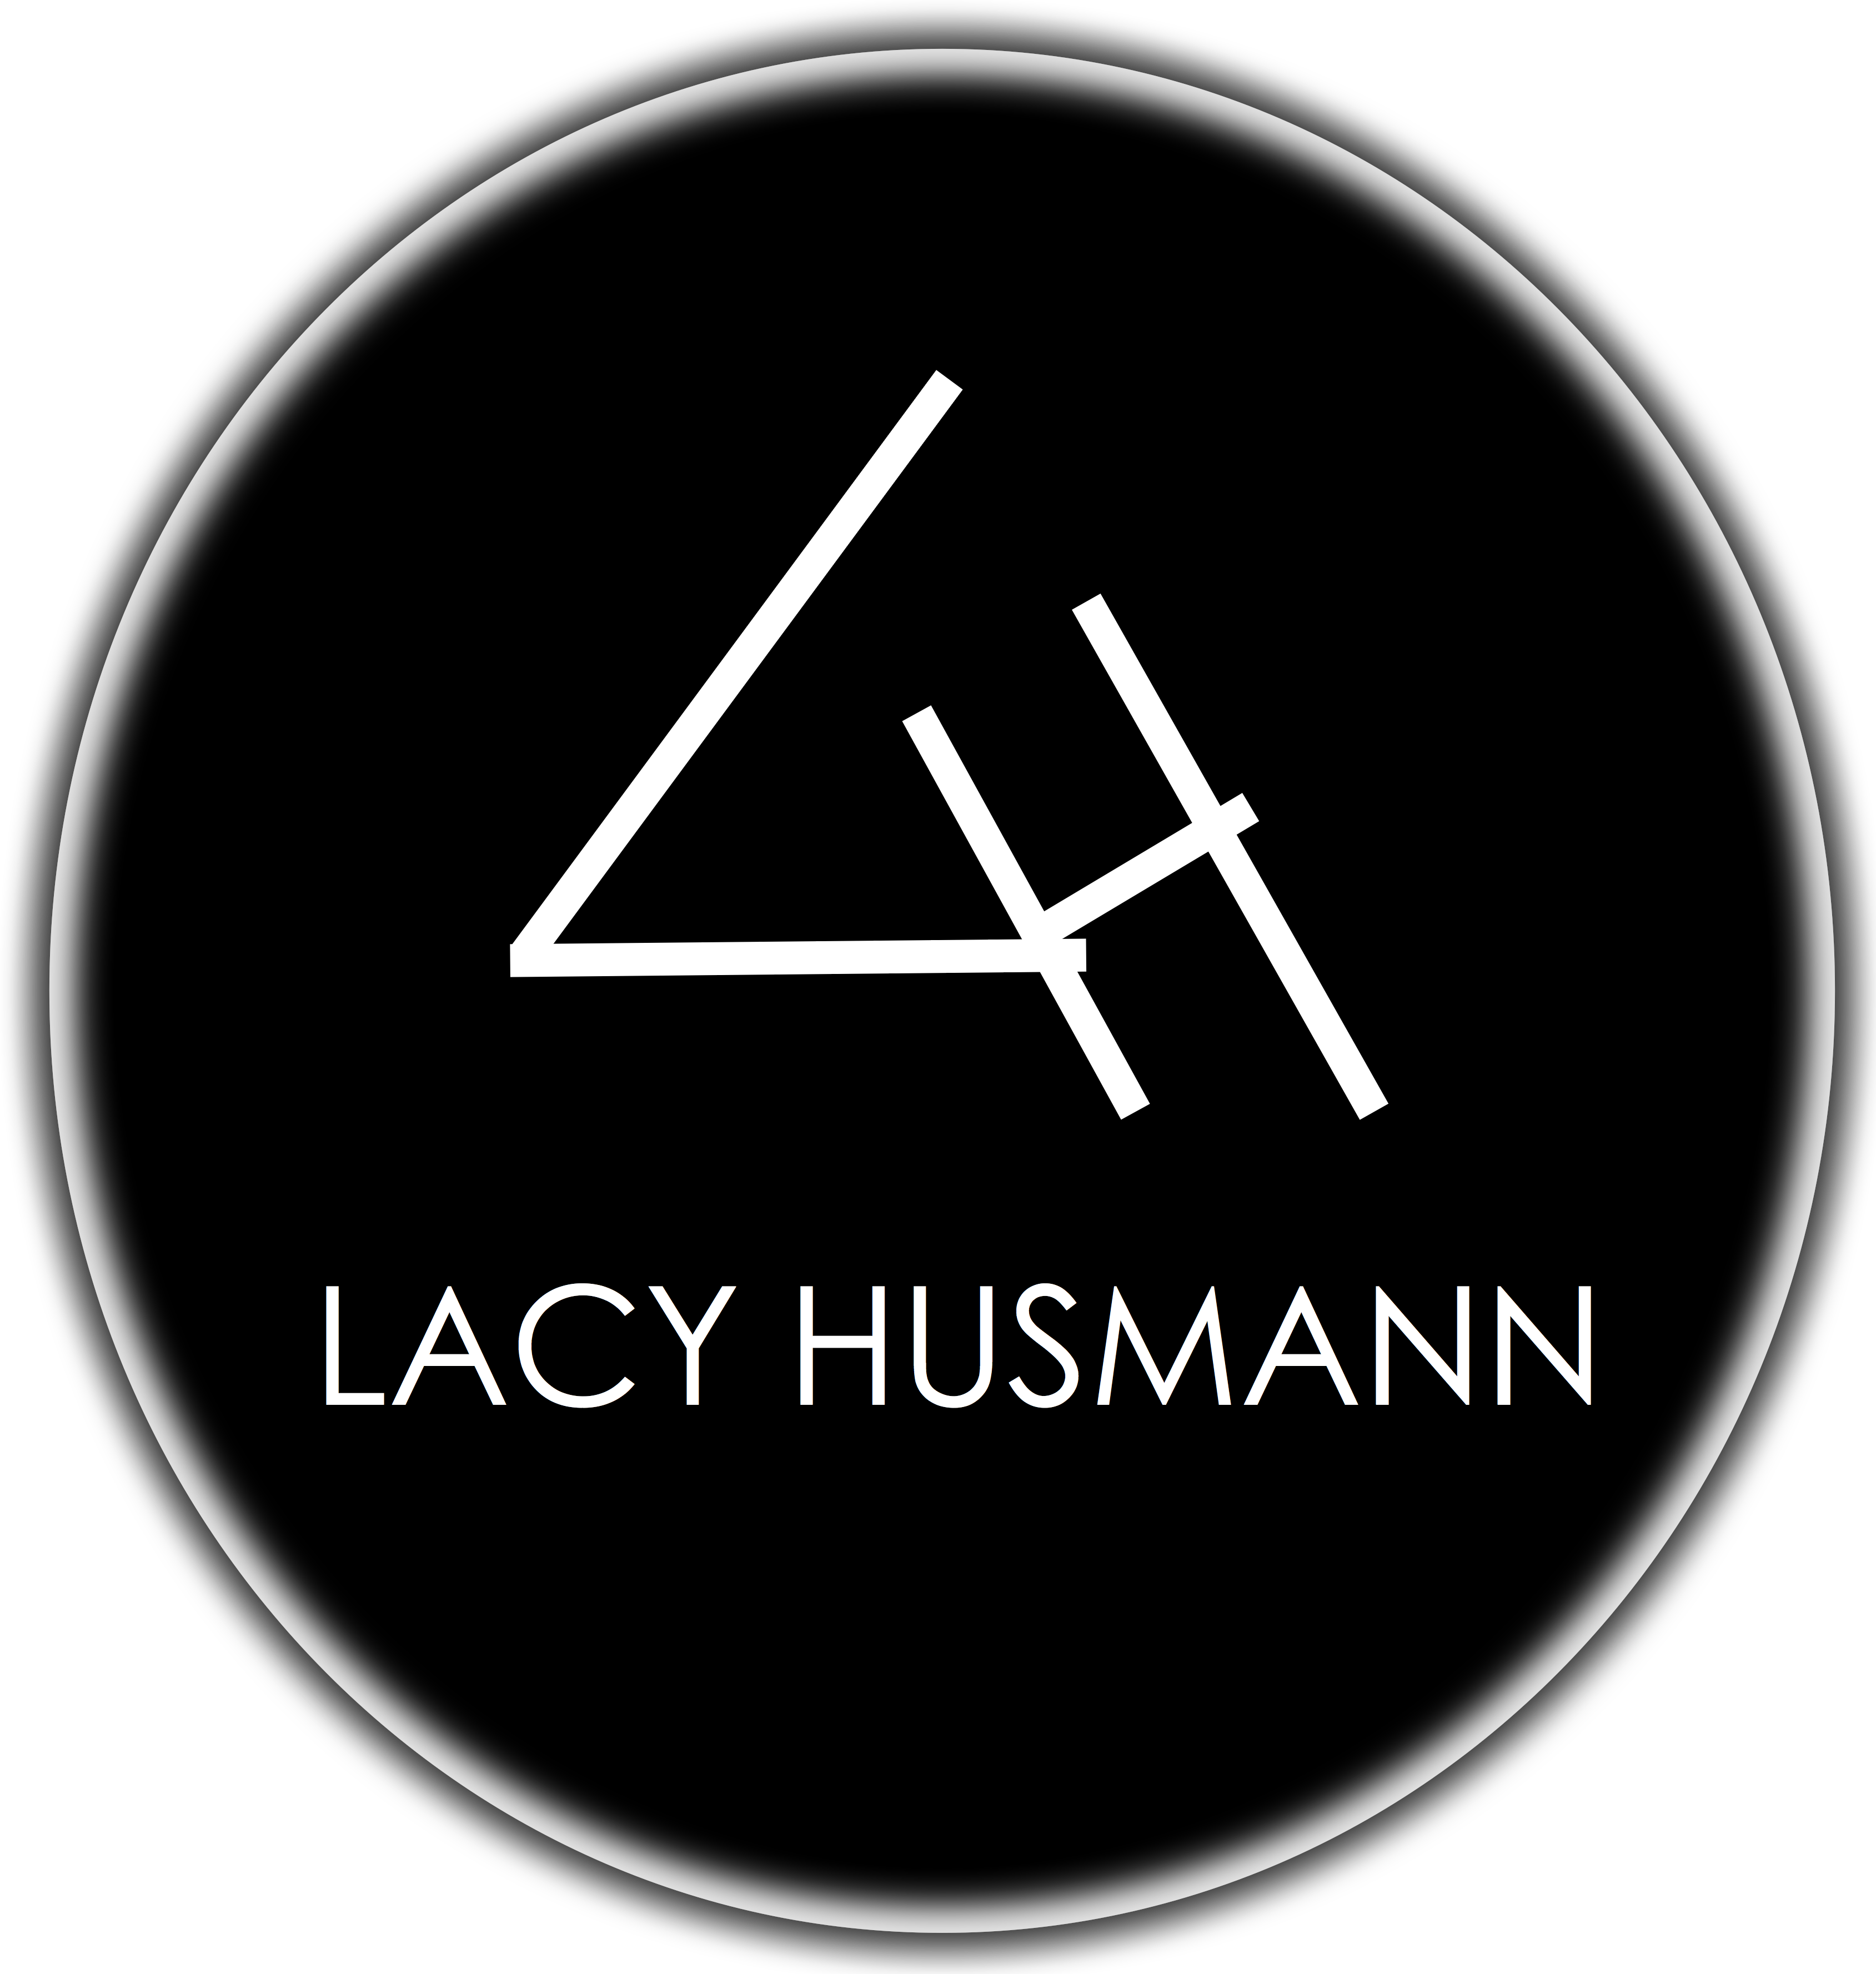 LACY HUSMANN IS ONE OF MODERN ARTS MOST SOUGHT AFTER ABSTRACT EXPRESSIONIST ARTIST.